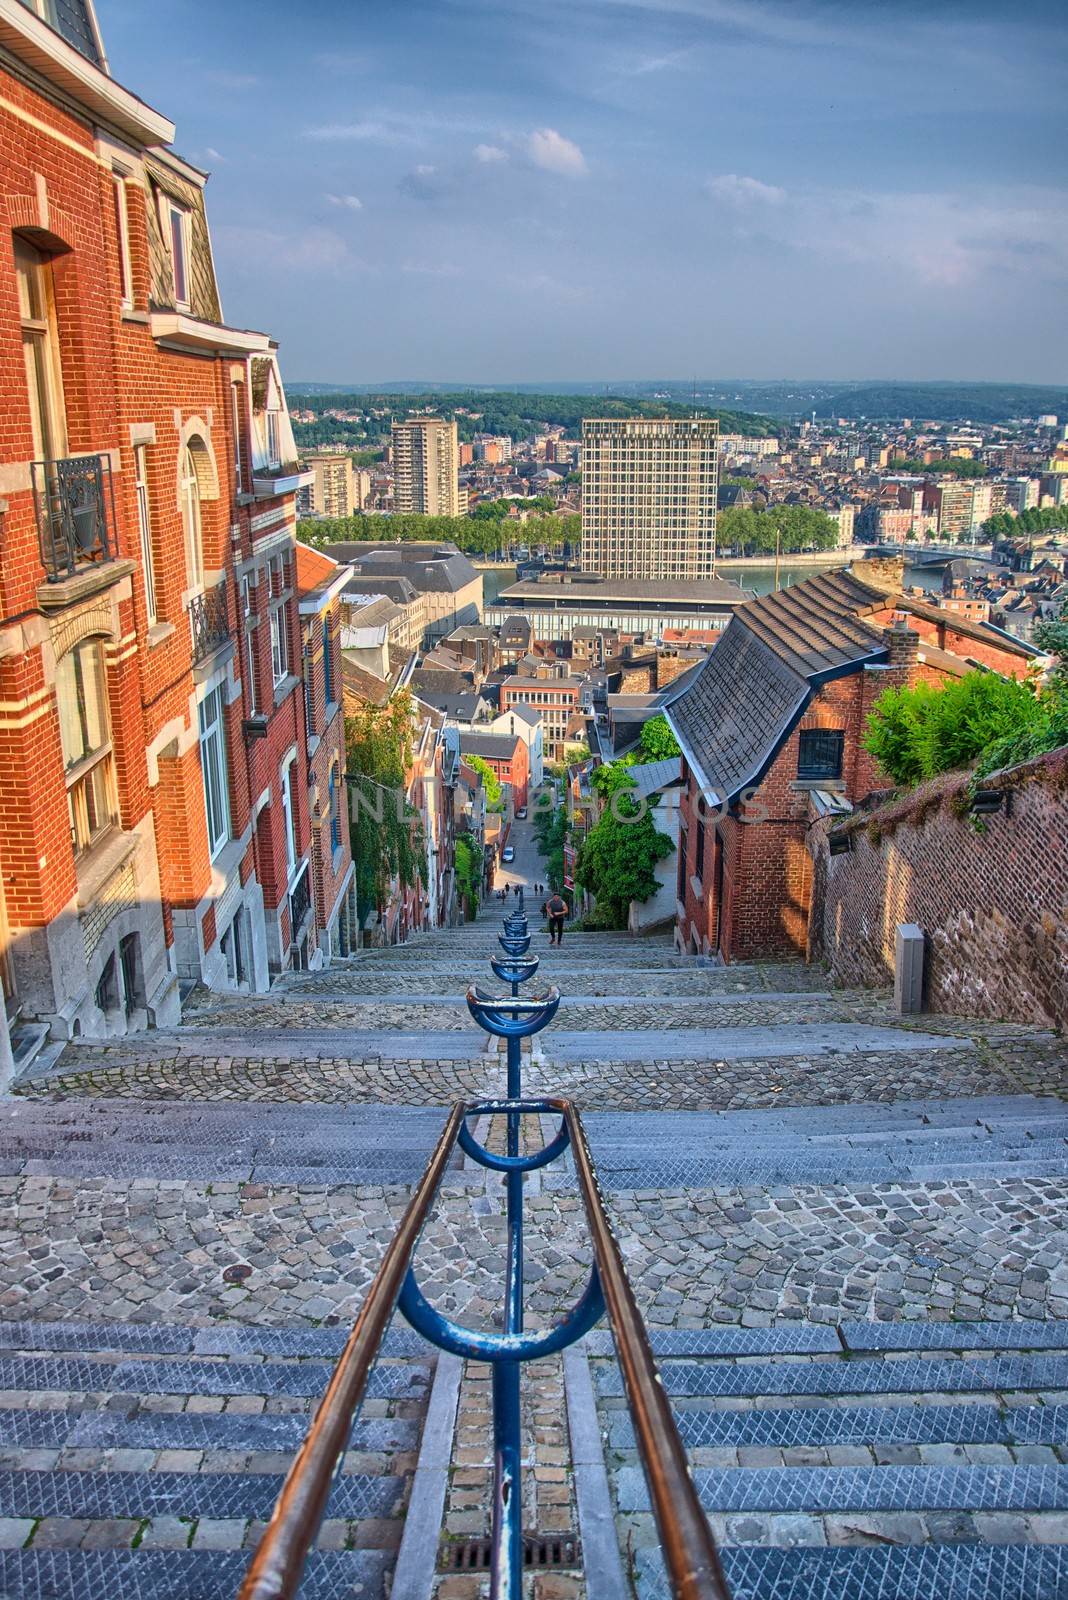 View over montagne de beuren stairway with red brick houses in L by Eagle2308